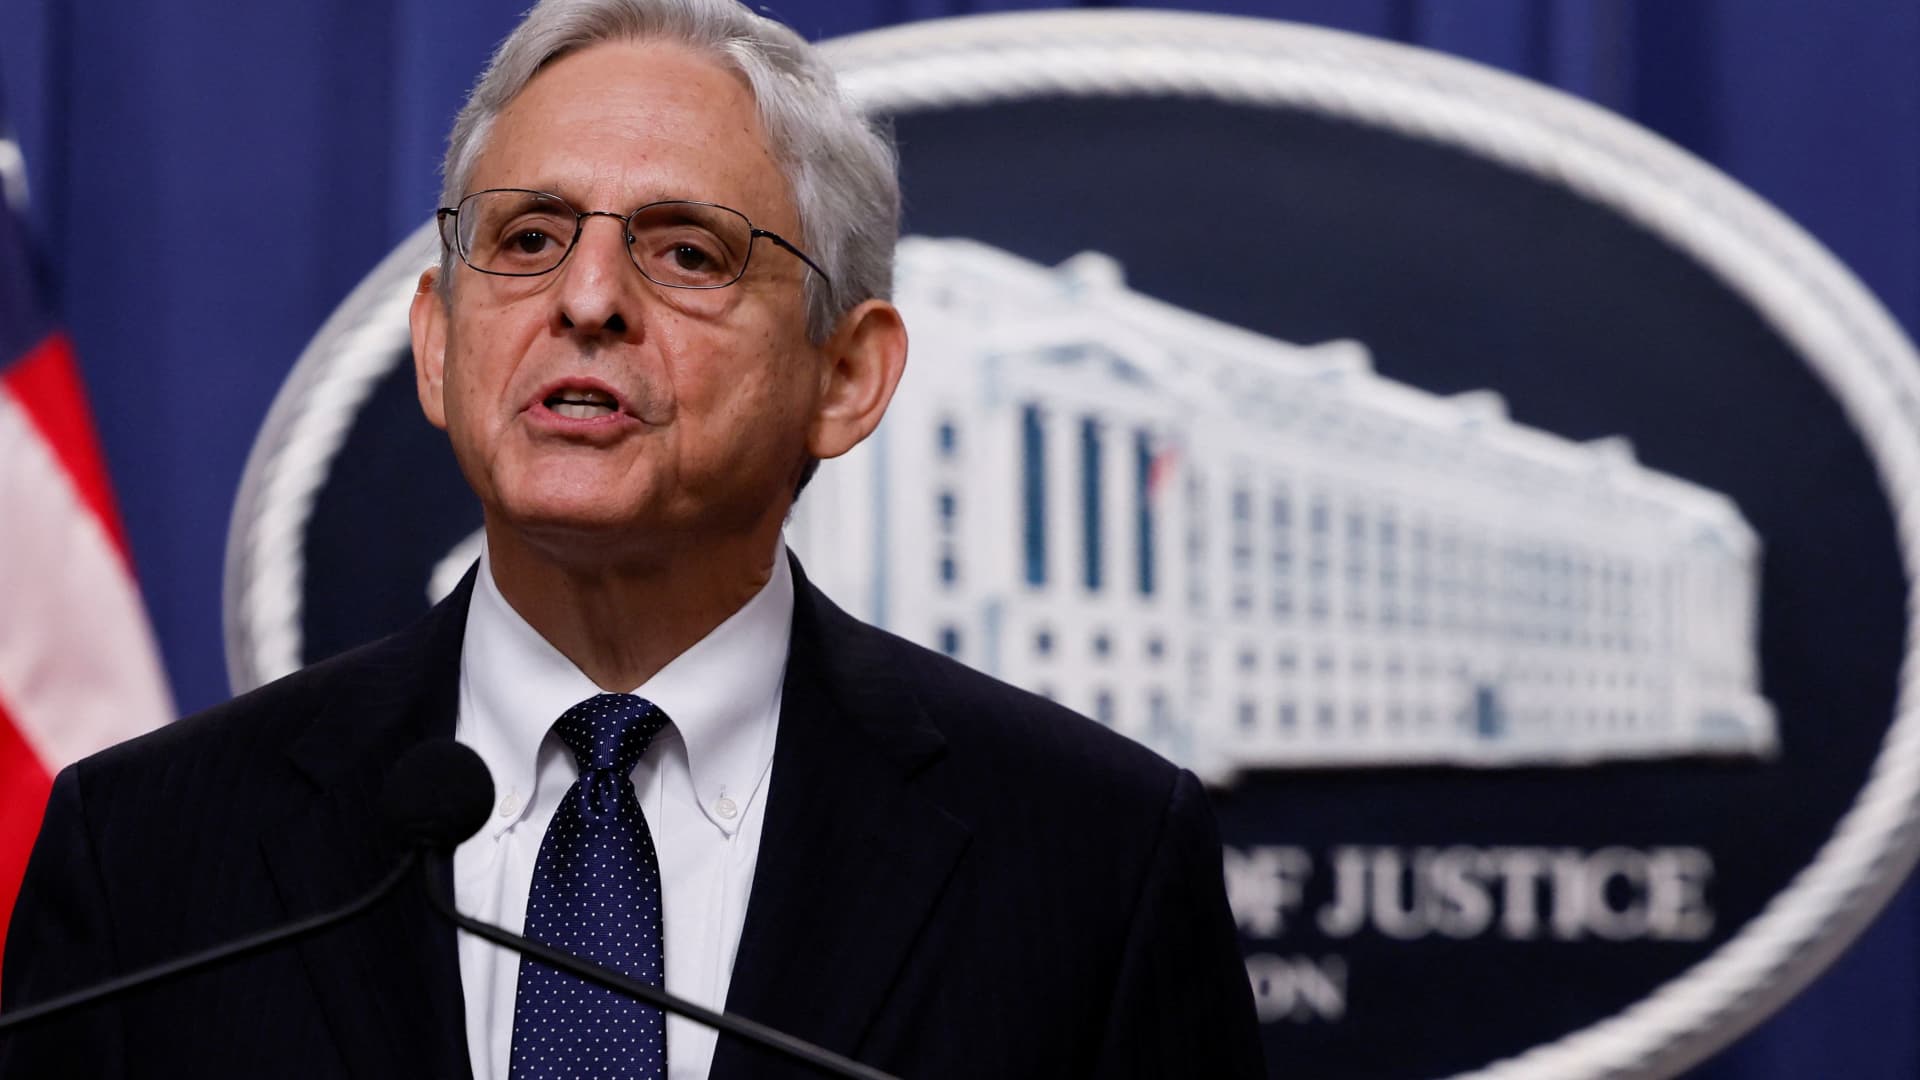 U.S. Attorney General Merrick Garland speaks about the FBI's search warrant served at former President Donald Trump's Mar-a-Lago estate in Florida during a statement at the U.S. Justice Department in Washington, U.S., August 11, 2022.